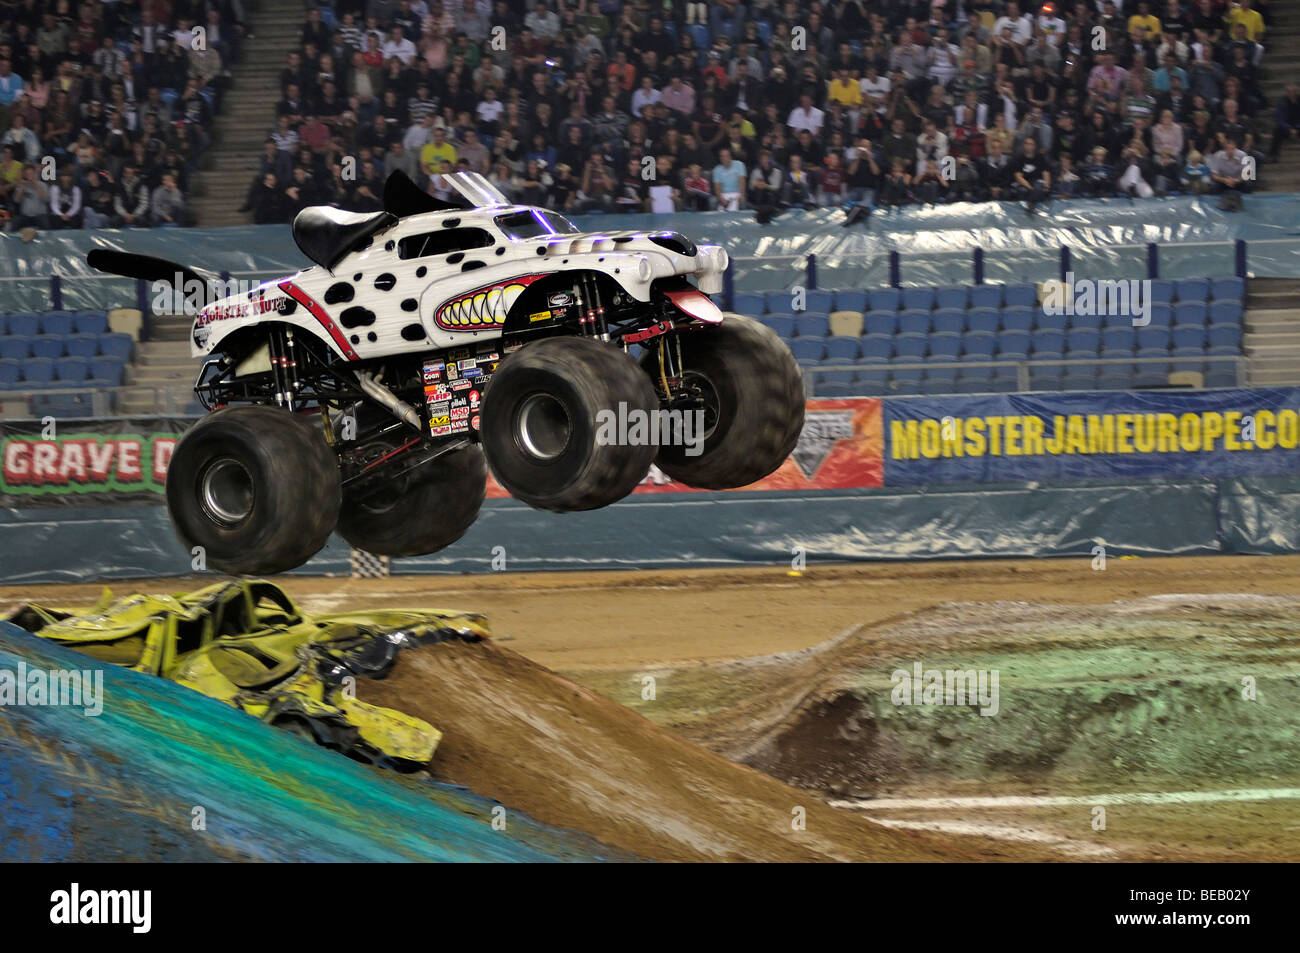 Monster Jam Monster Mutt Dalmatian with Candice Jolly Driver Stock Photo